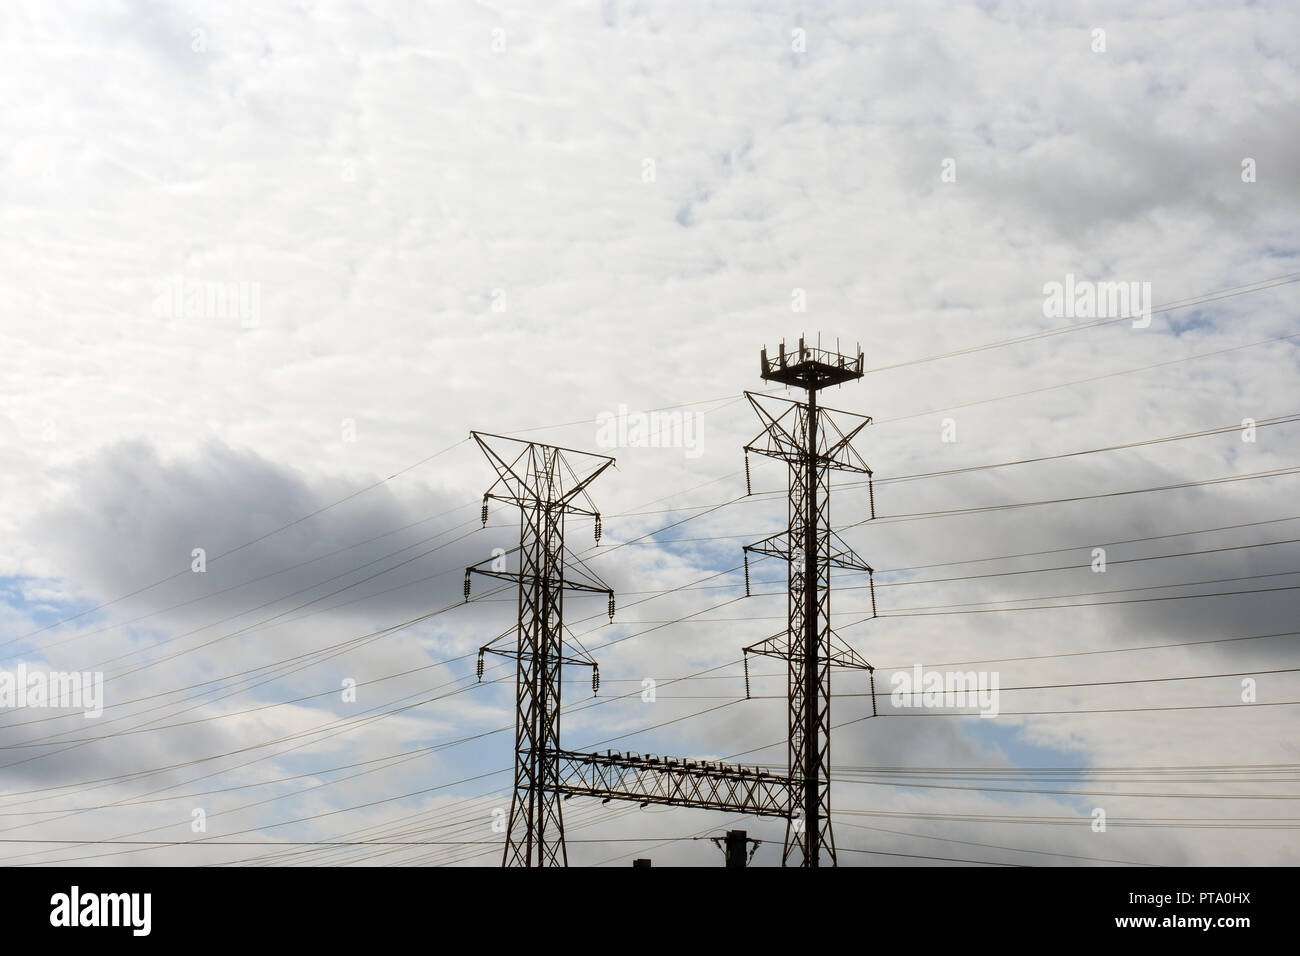 High voltage electrical power tower and cables on a partly cloudy day Stock Photo